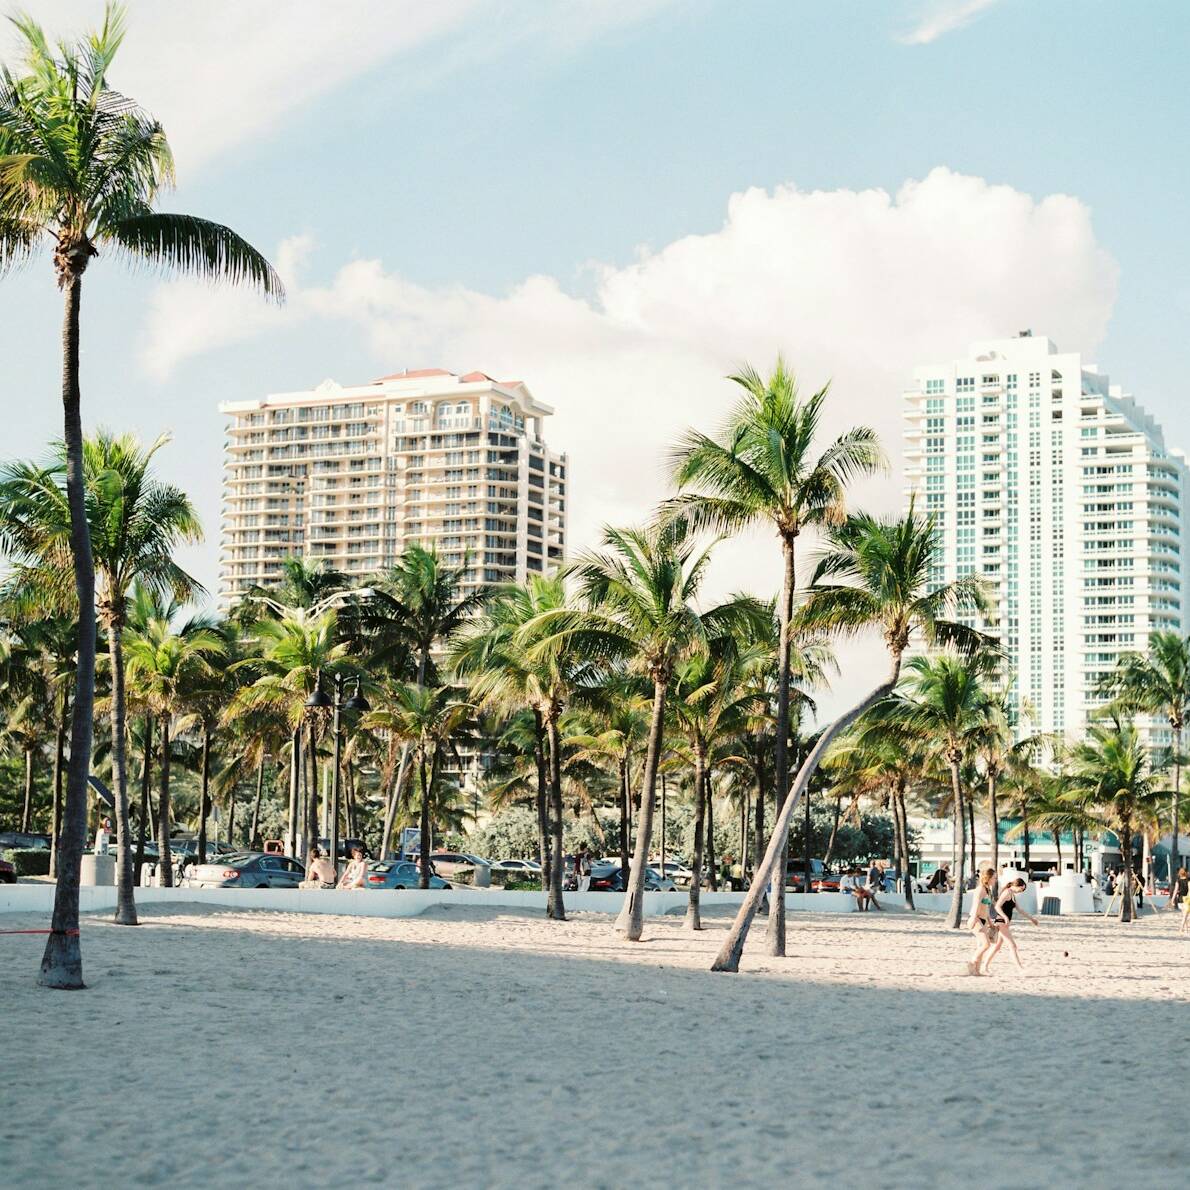 Sunny beachfront lined with tall palm trees and a row of high-rise buildings in the background. The sandy area has a few beachgoers strolling and cars parked near the edge. Blue skies with scattered clouds complete the tropical city landscape.